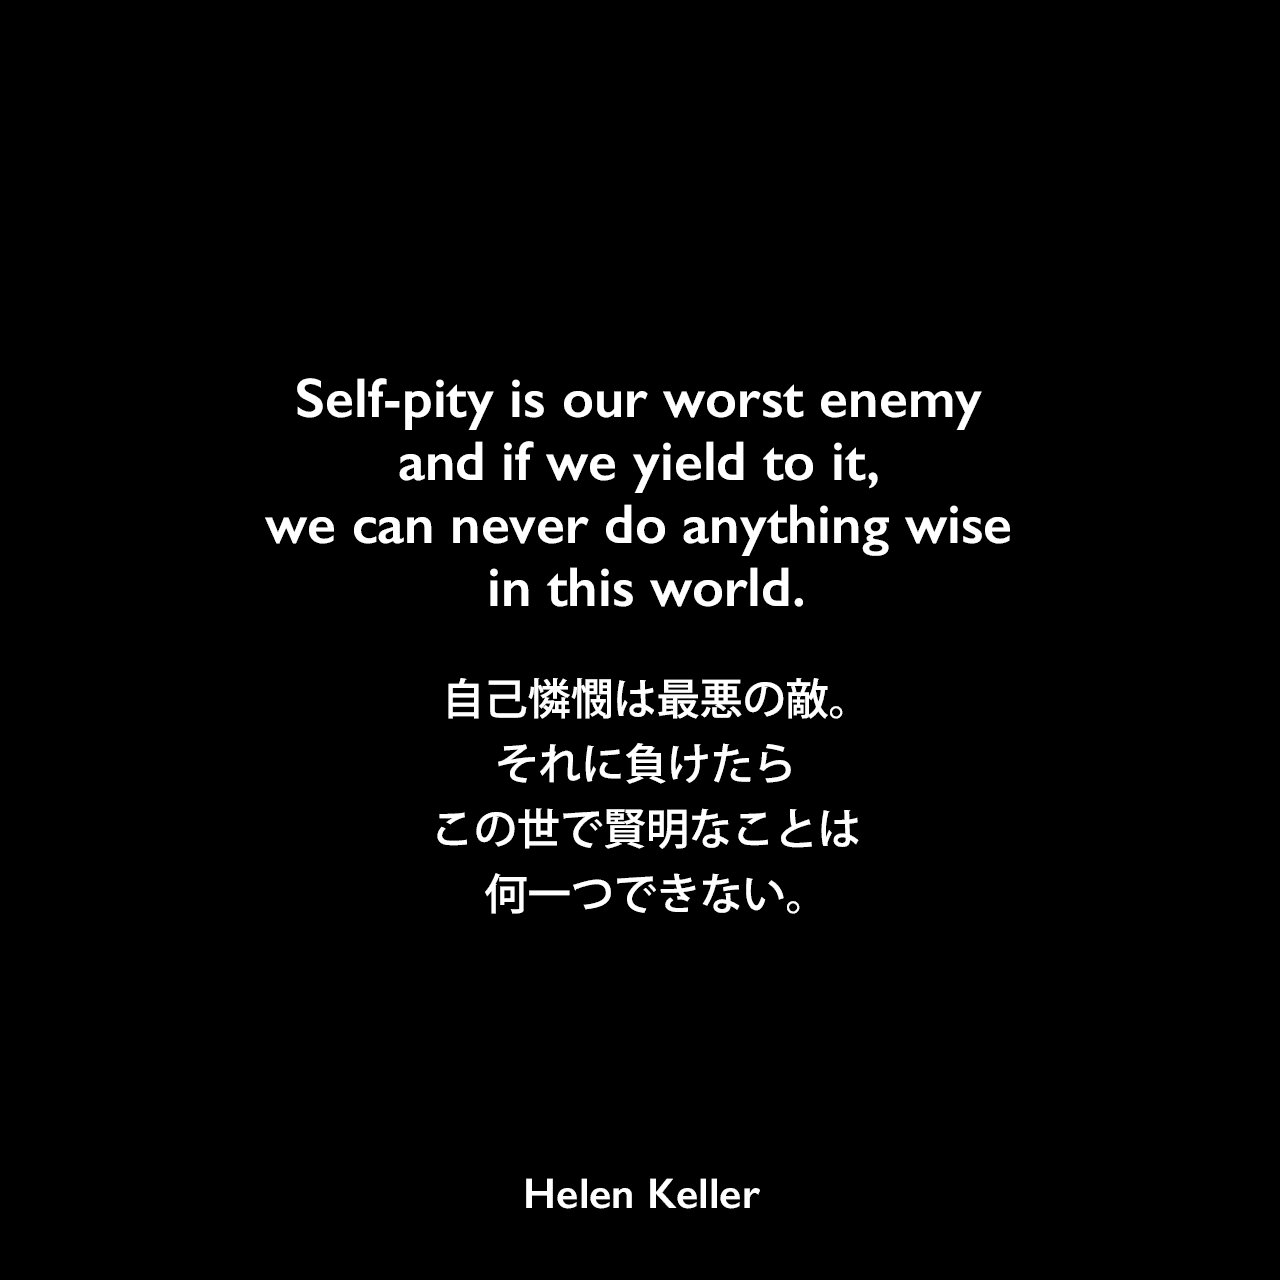 Self-pity is our worst enemy and if we yield to it, we can never do anything wise in this world.自己憐憫は最悪の敵。それに負けたら、この世で賢明なことは何一つできない。Helen Keller